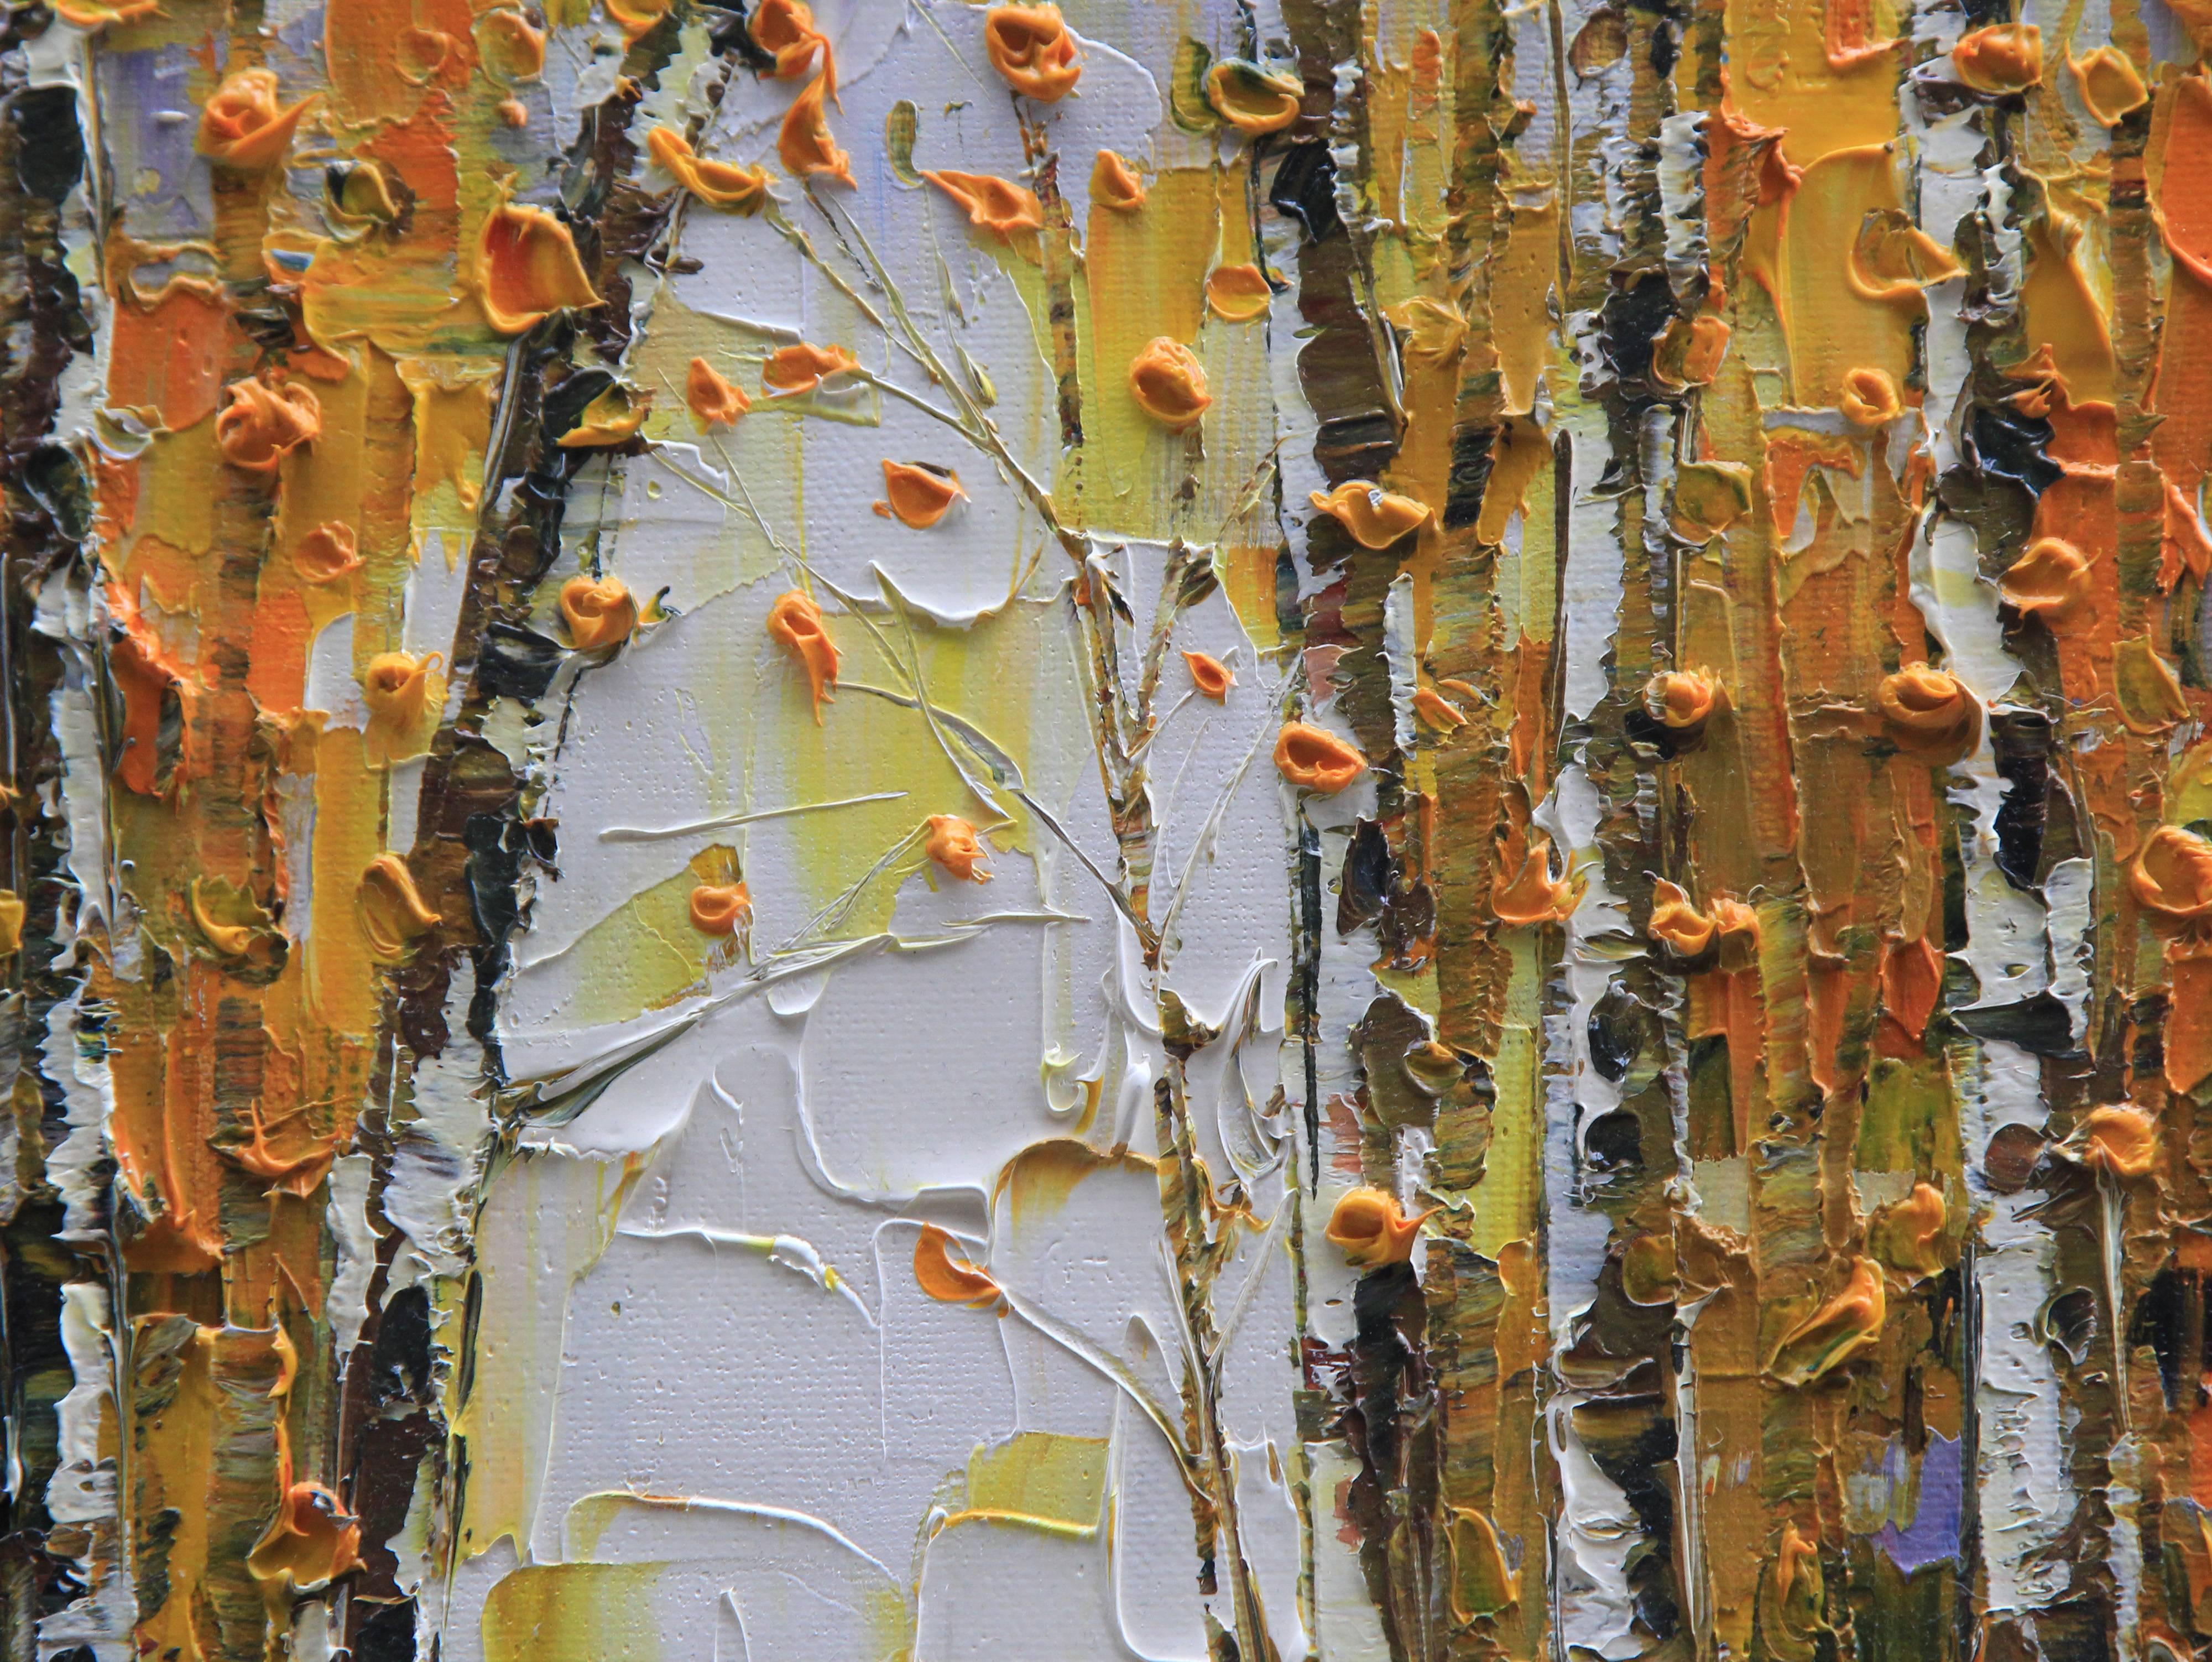 <p>Artist Comments<br />Whether it's fall, winter, spring or summer it's always time for some colorful birch! This painting is done with a palette knife, and resonates with a poetic symphony of turning leaves, crisp, bright earthy colors, and